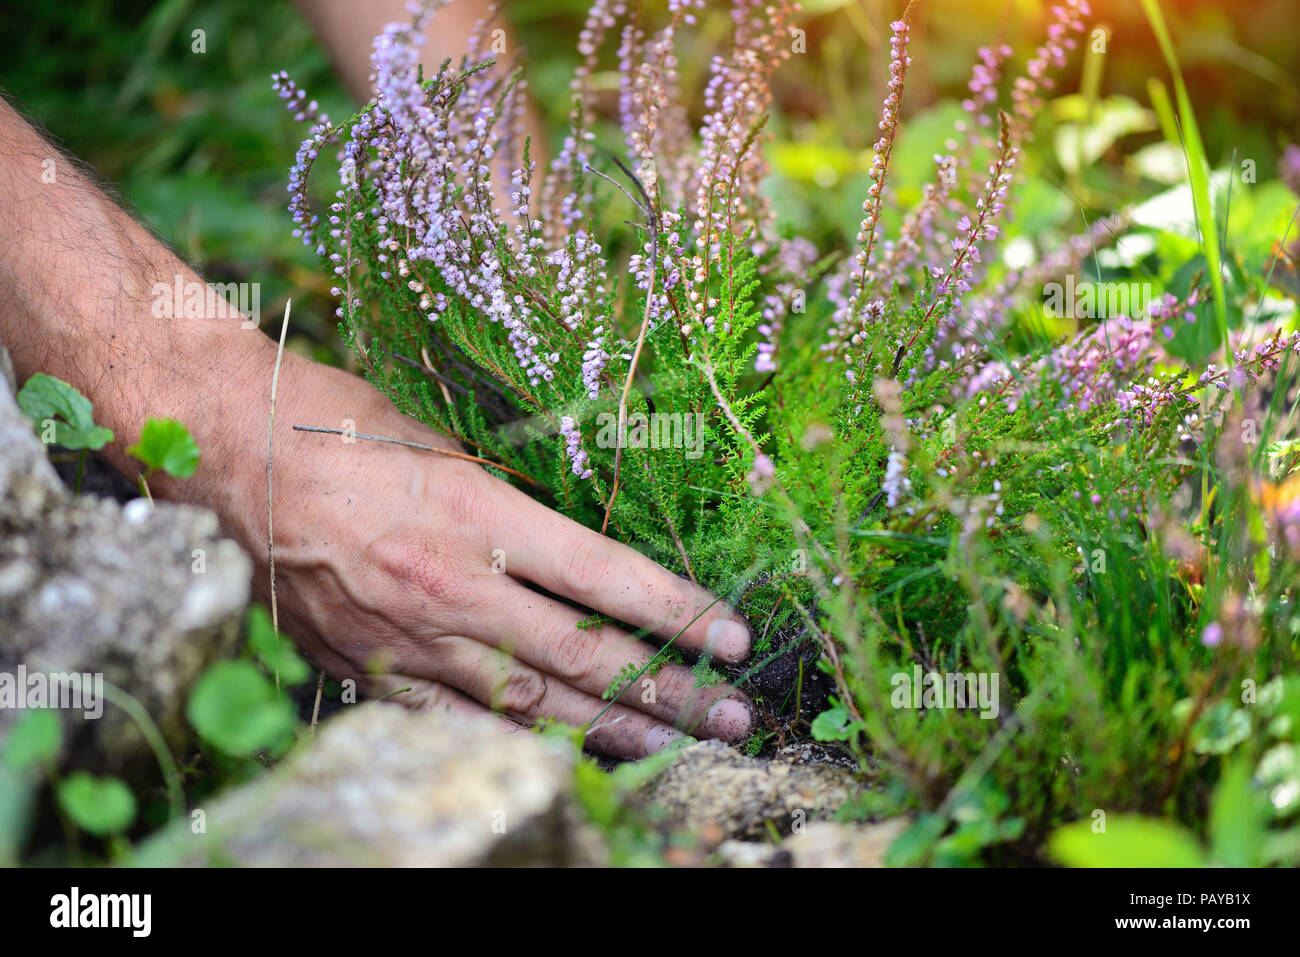 Hands holding blossoming heather (Calluna vulgaris). Planting flowers in the ground. Stock Photo